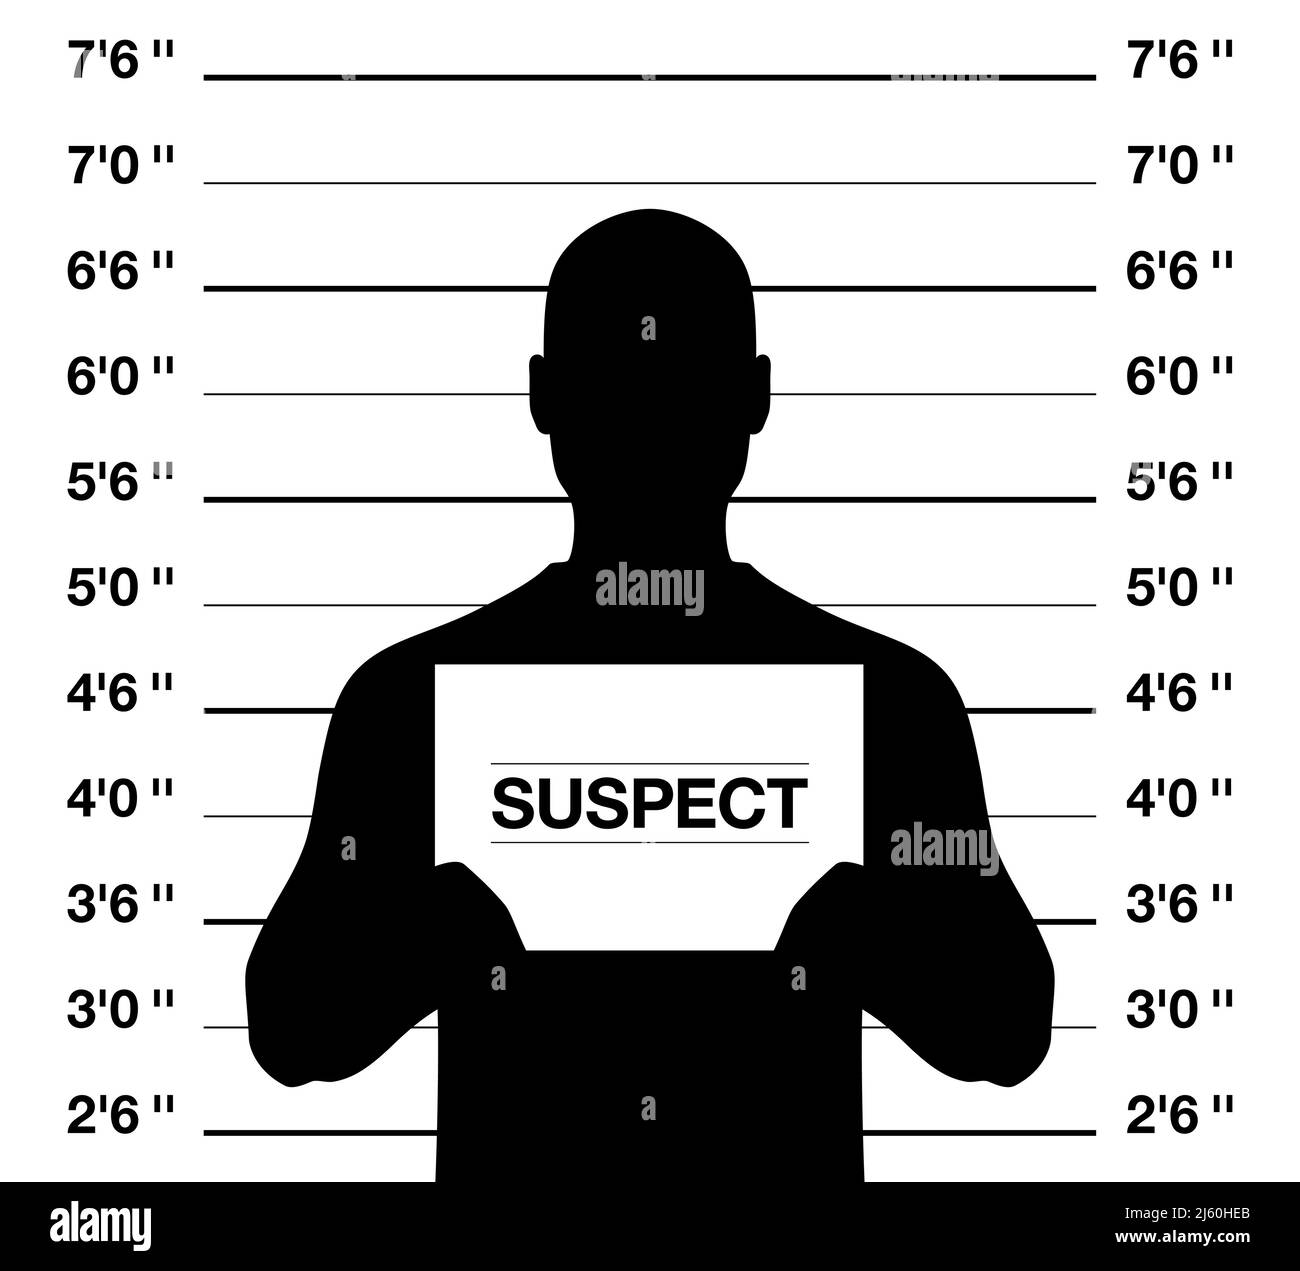 Male suspect mugshot, vector illustration. Anonymus man standing on a criminal photo shooting background. Stock Vector